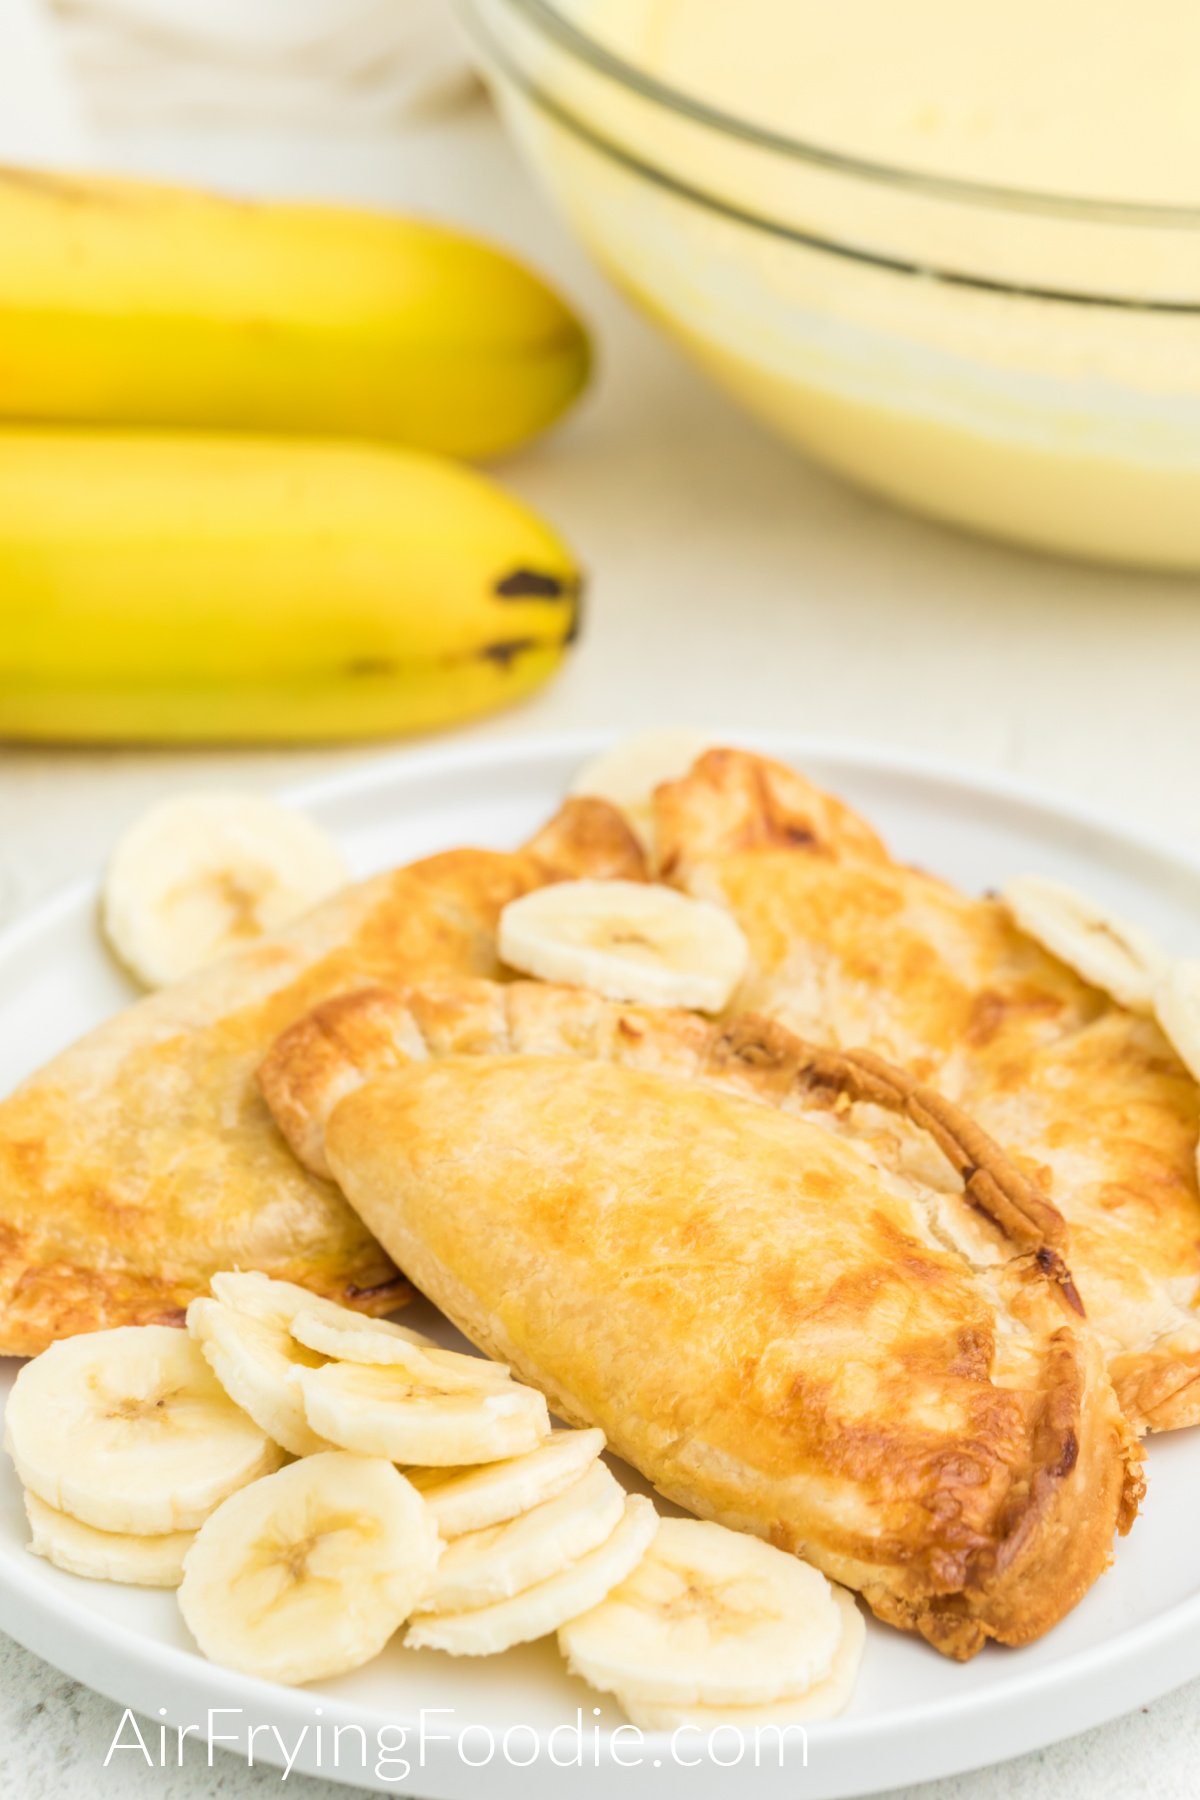 Banana Pudding Pies fried in the air fryer and served on a white plate with sliced bananas.